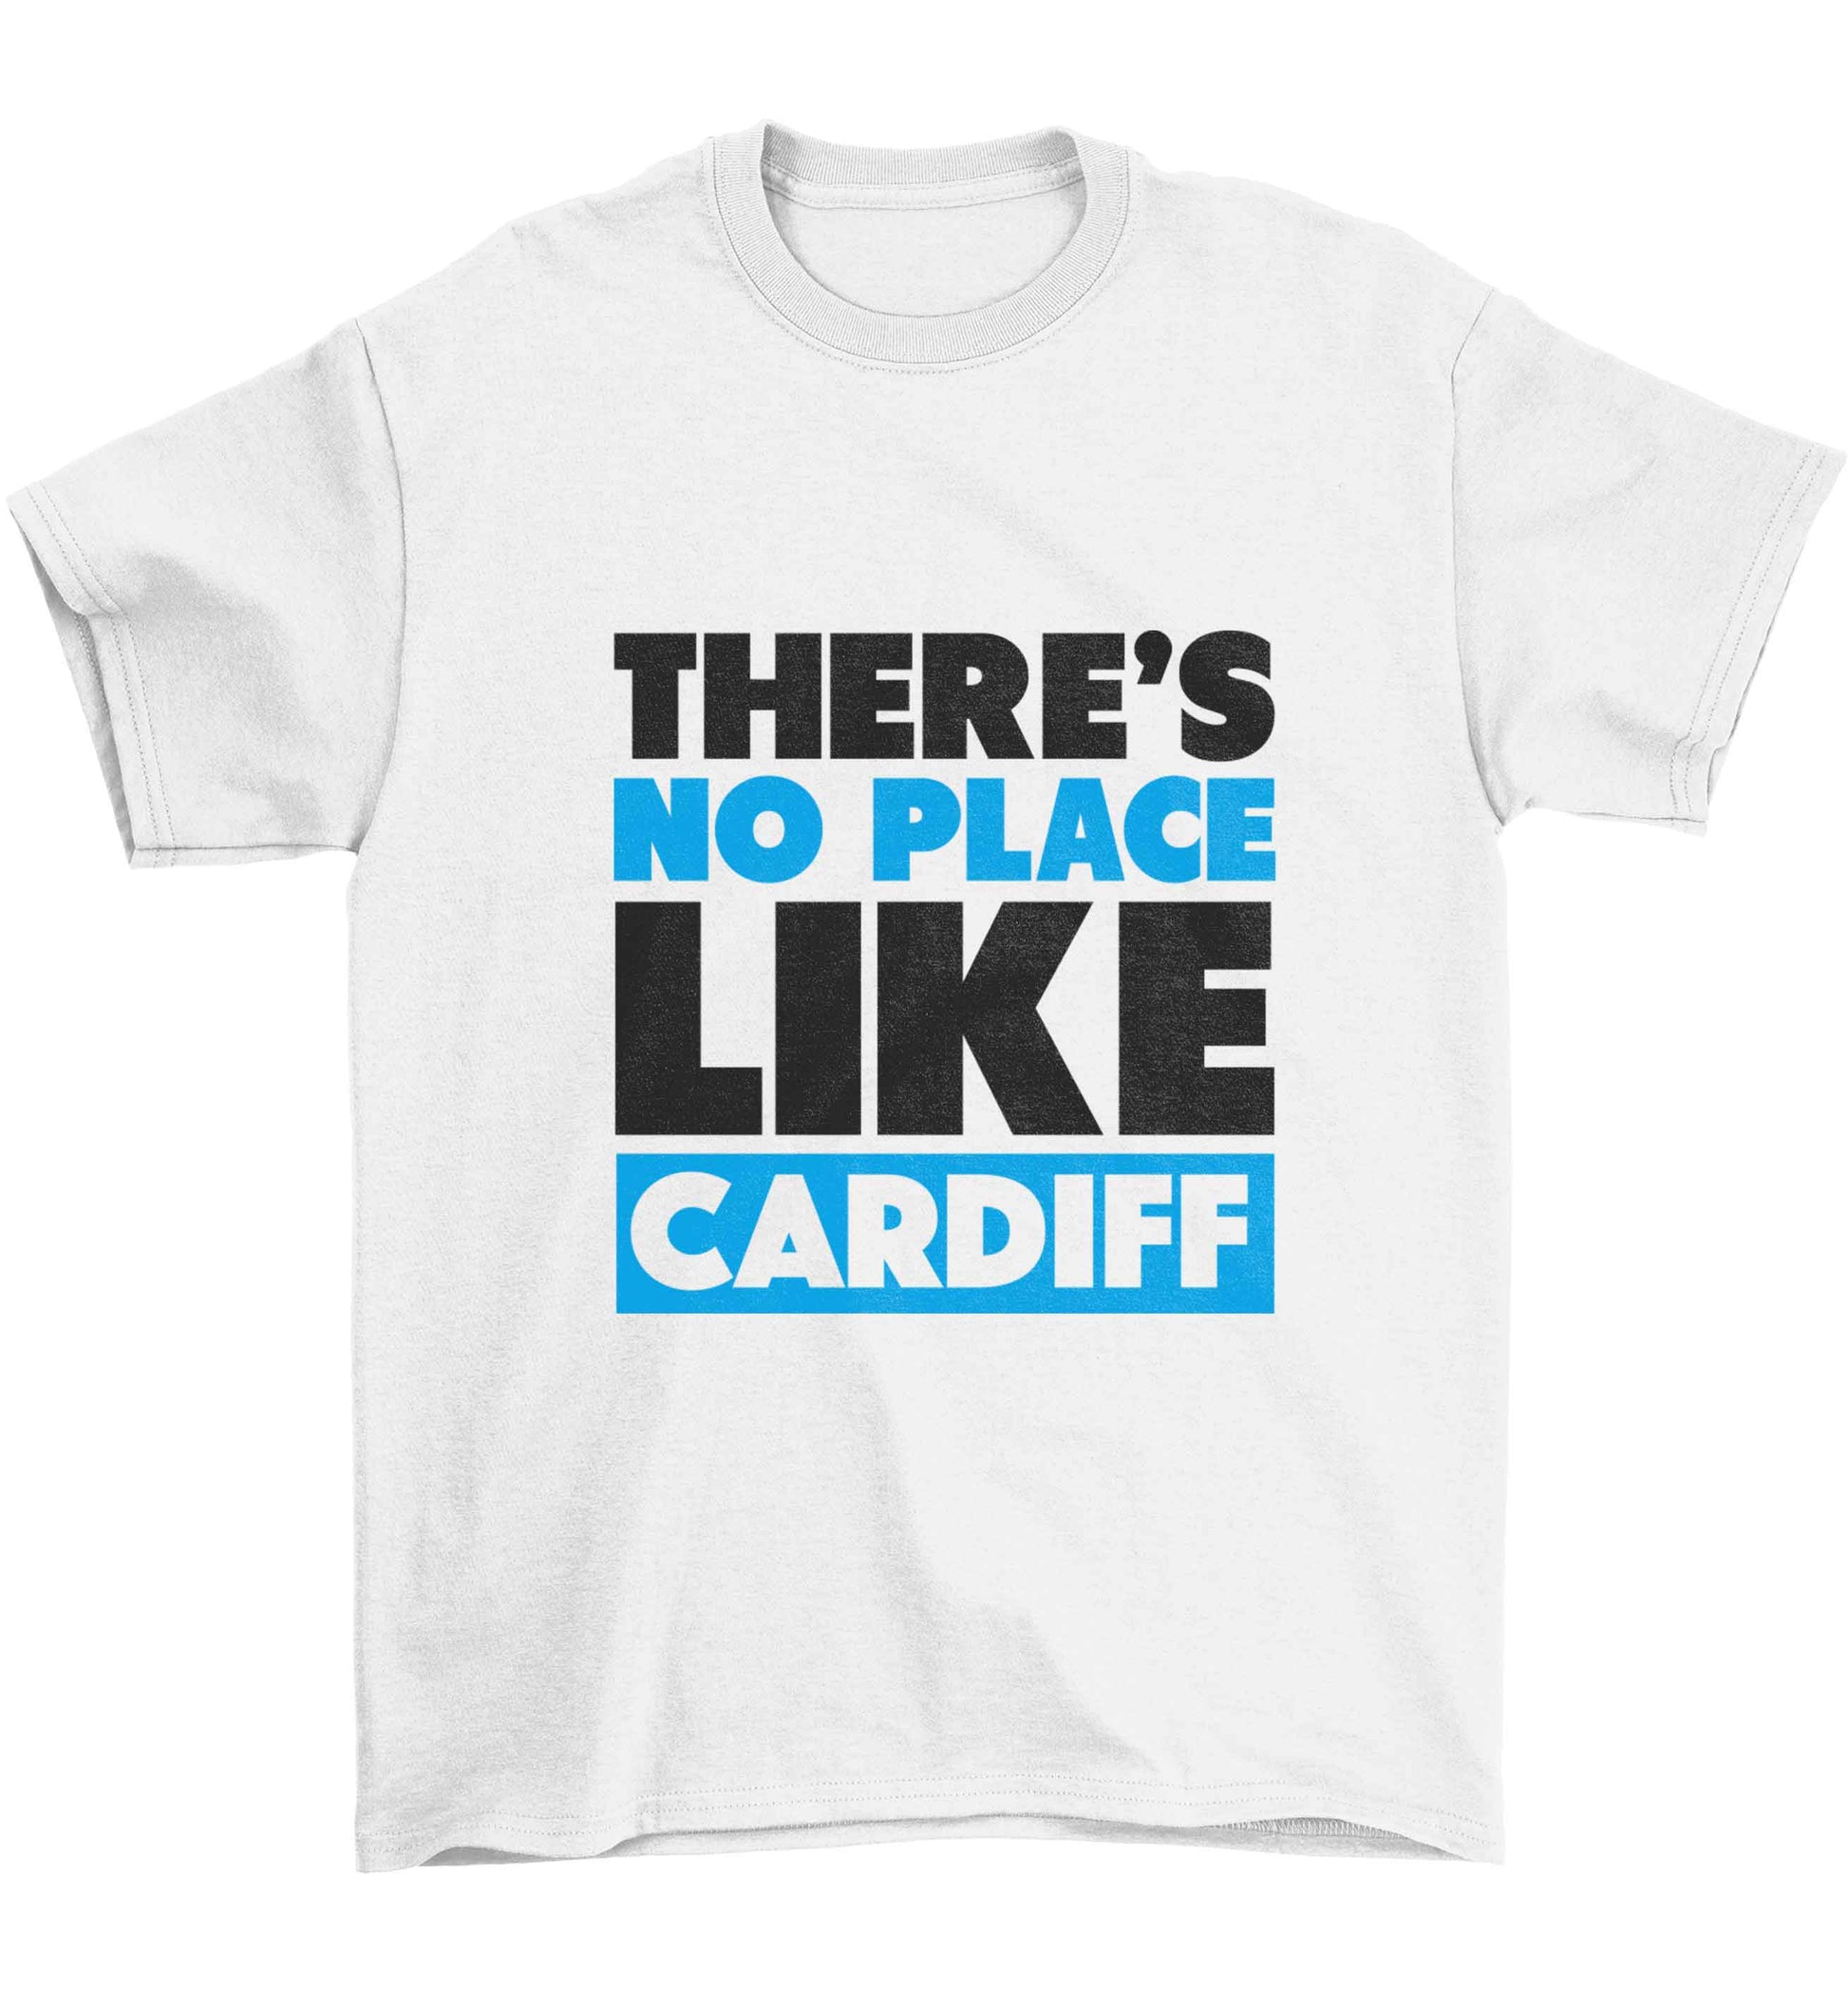 There's no place like Cardiff Children's white Tshirt 12-13 Years